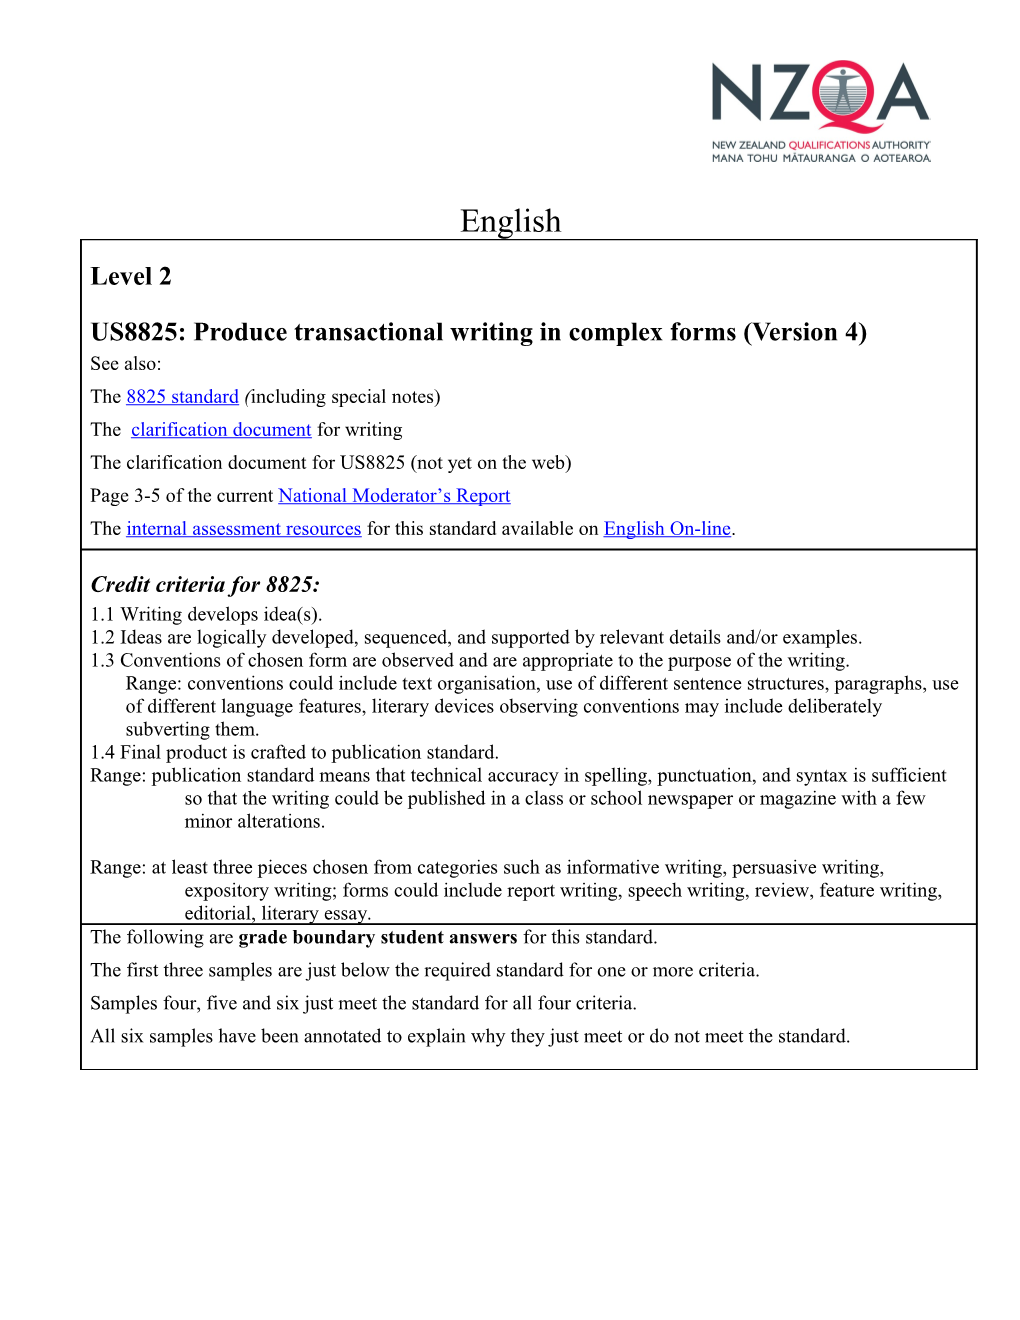 US8825: Produce Transactional Writing in Complex Forms (Version 4)